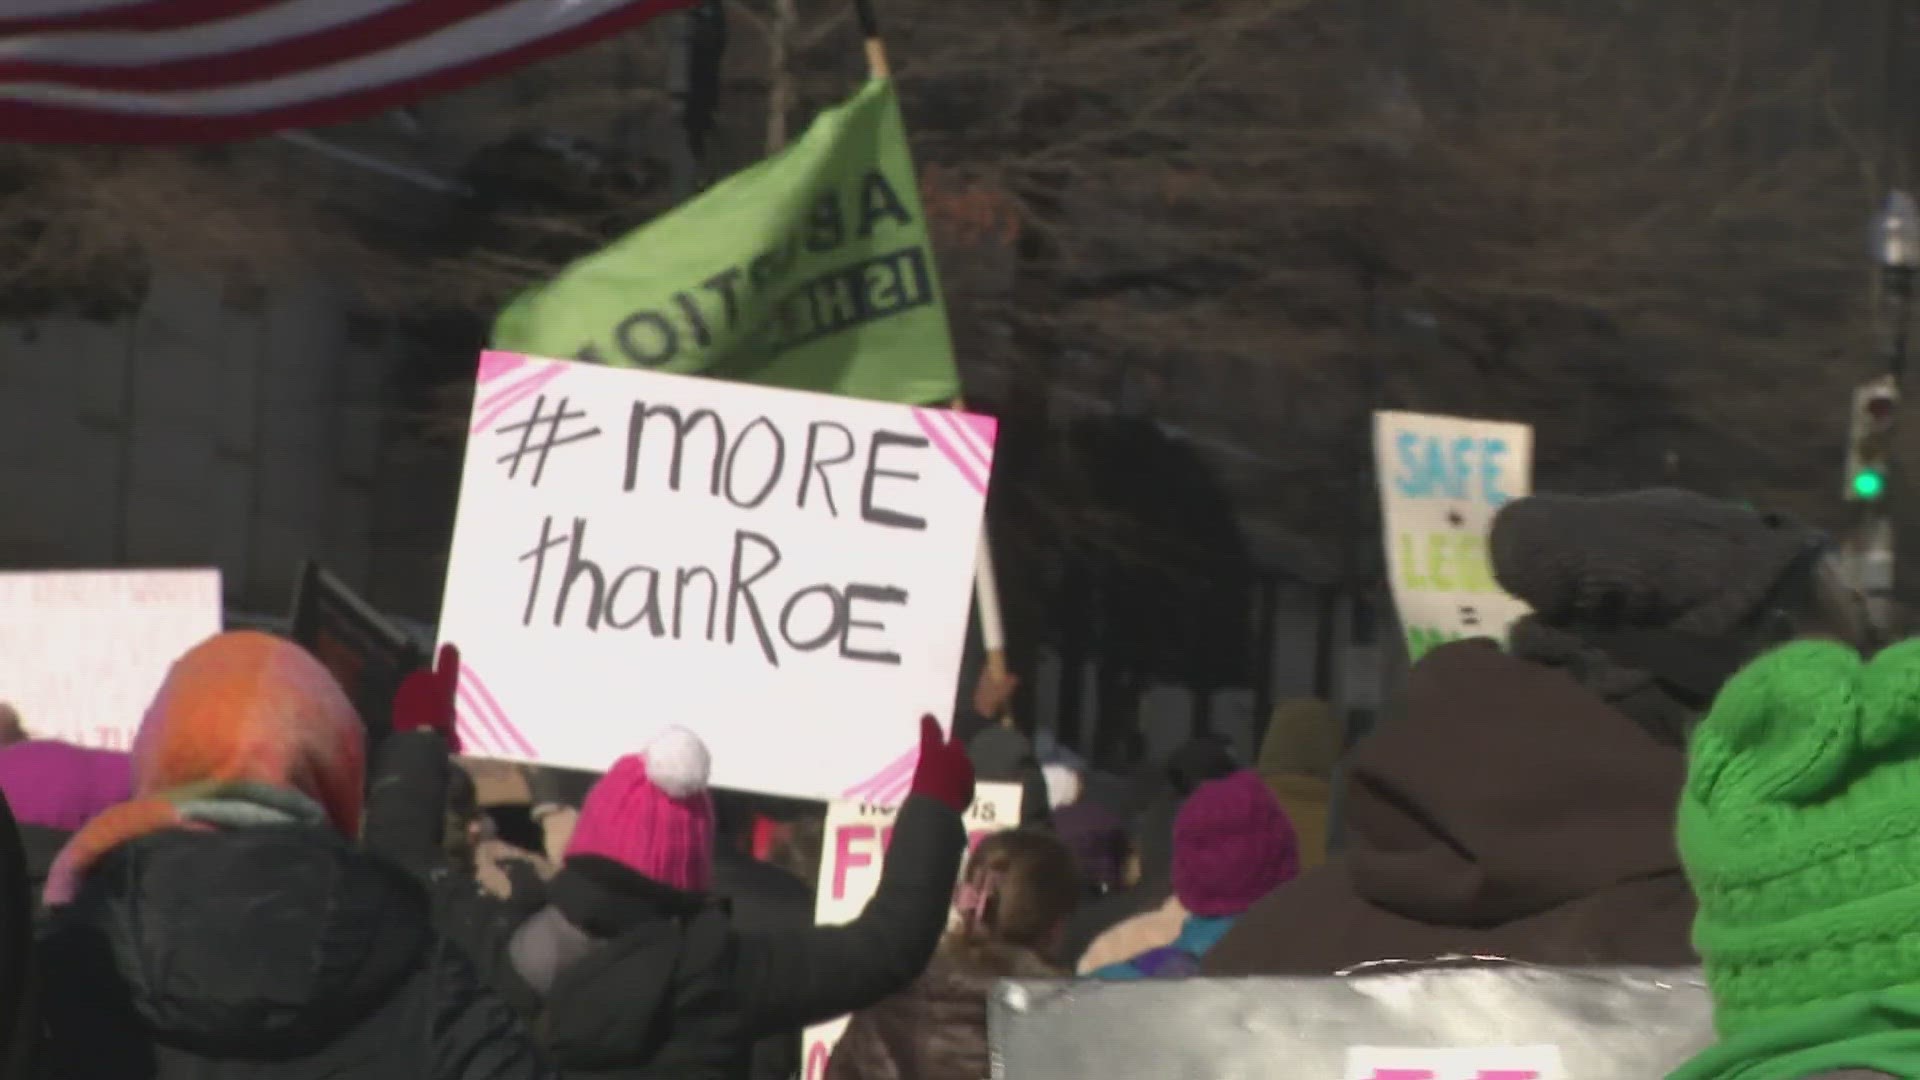 It’s an election year and abortion rights measures are expected to be on the ballot. Pro-abortion demonstrators protested in Freedom Plaza to get their voices heard.